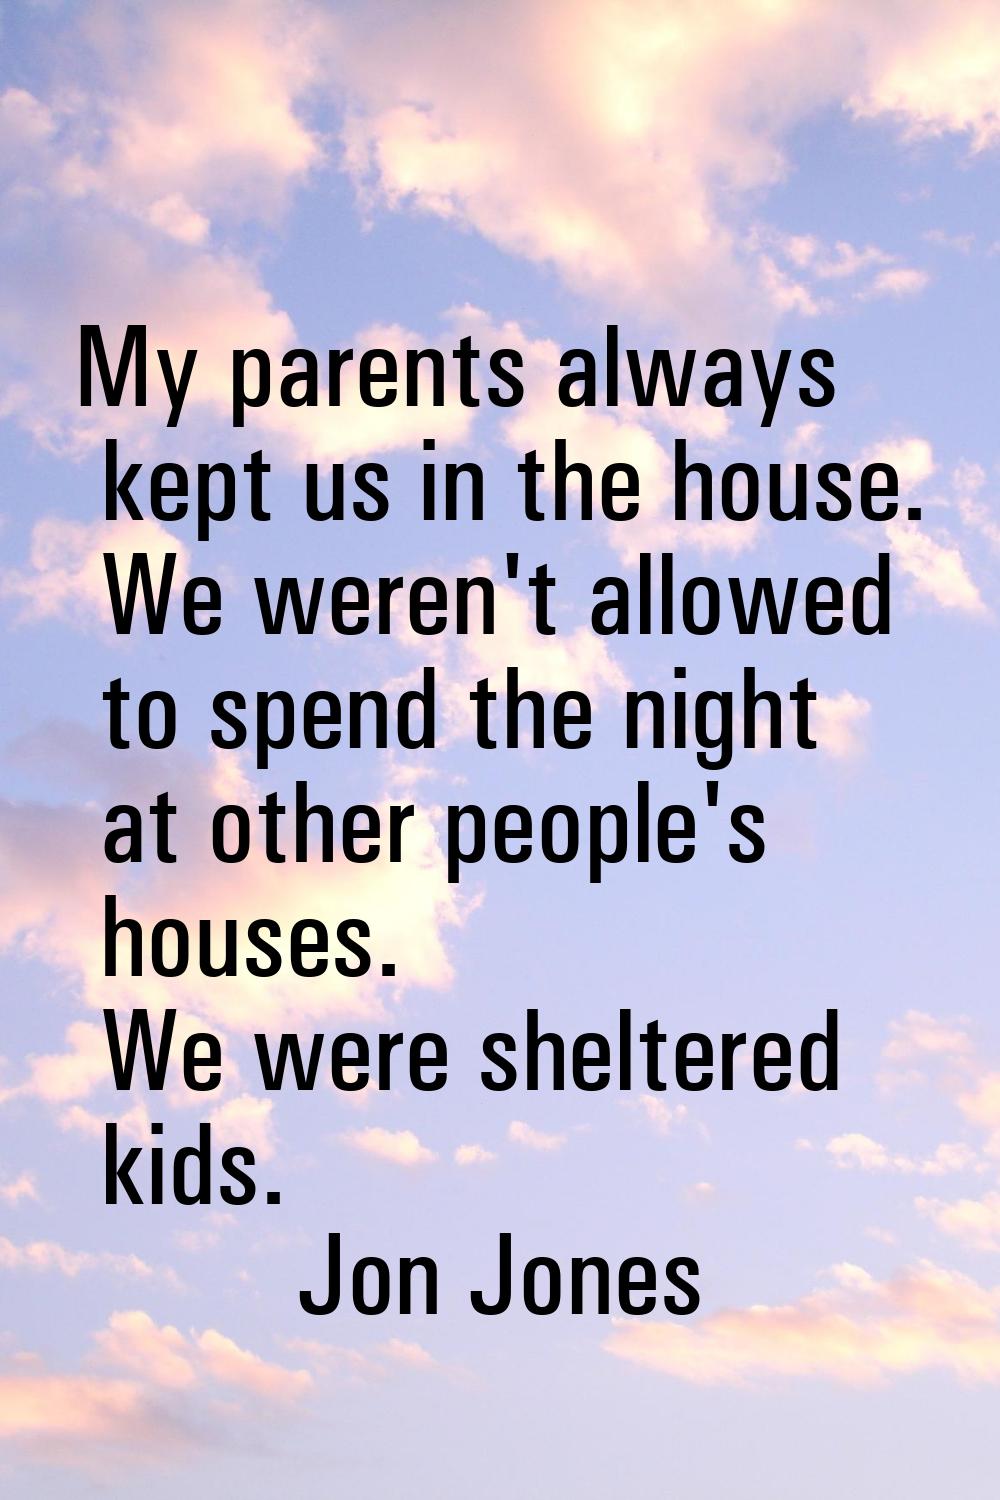 My parents always kept us in the house. We weren't allowed to spend the night at other people's hou